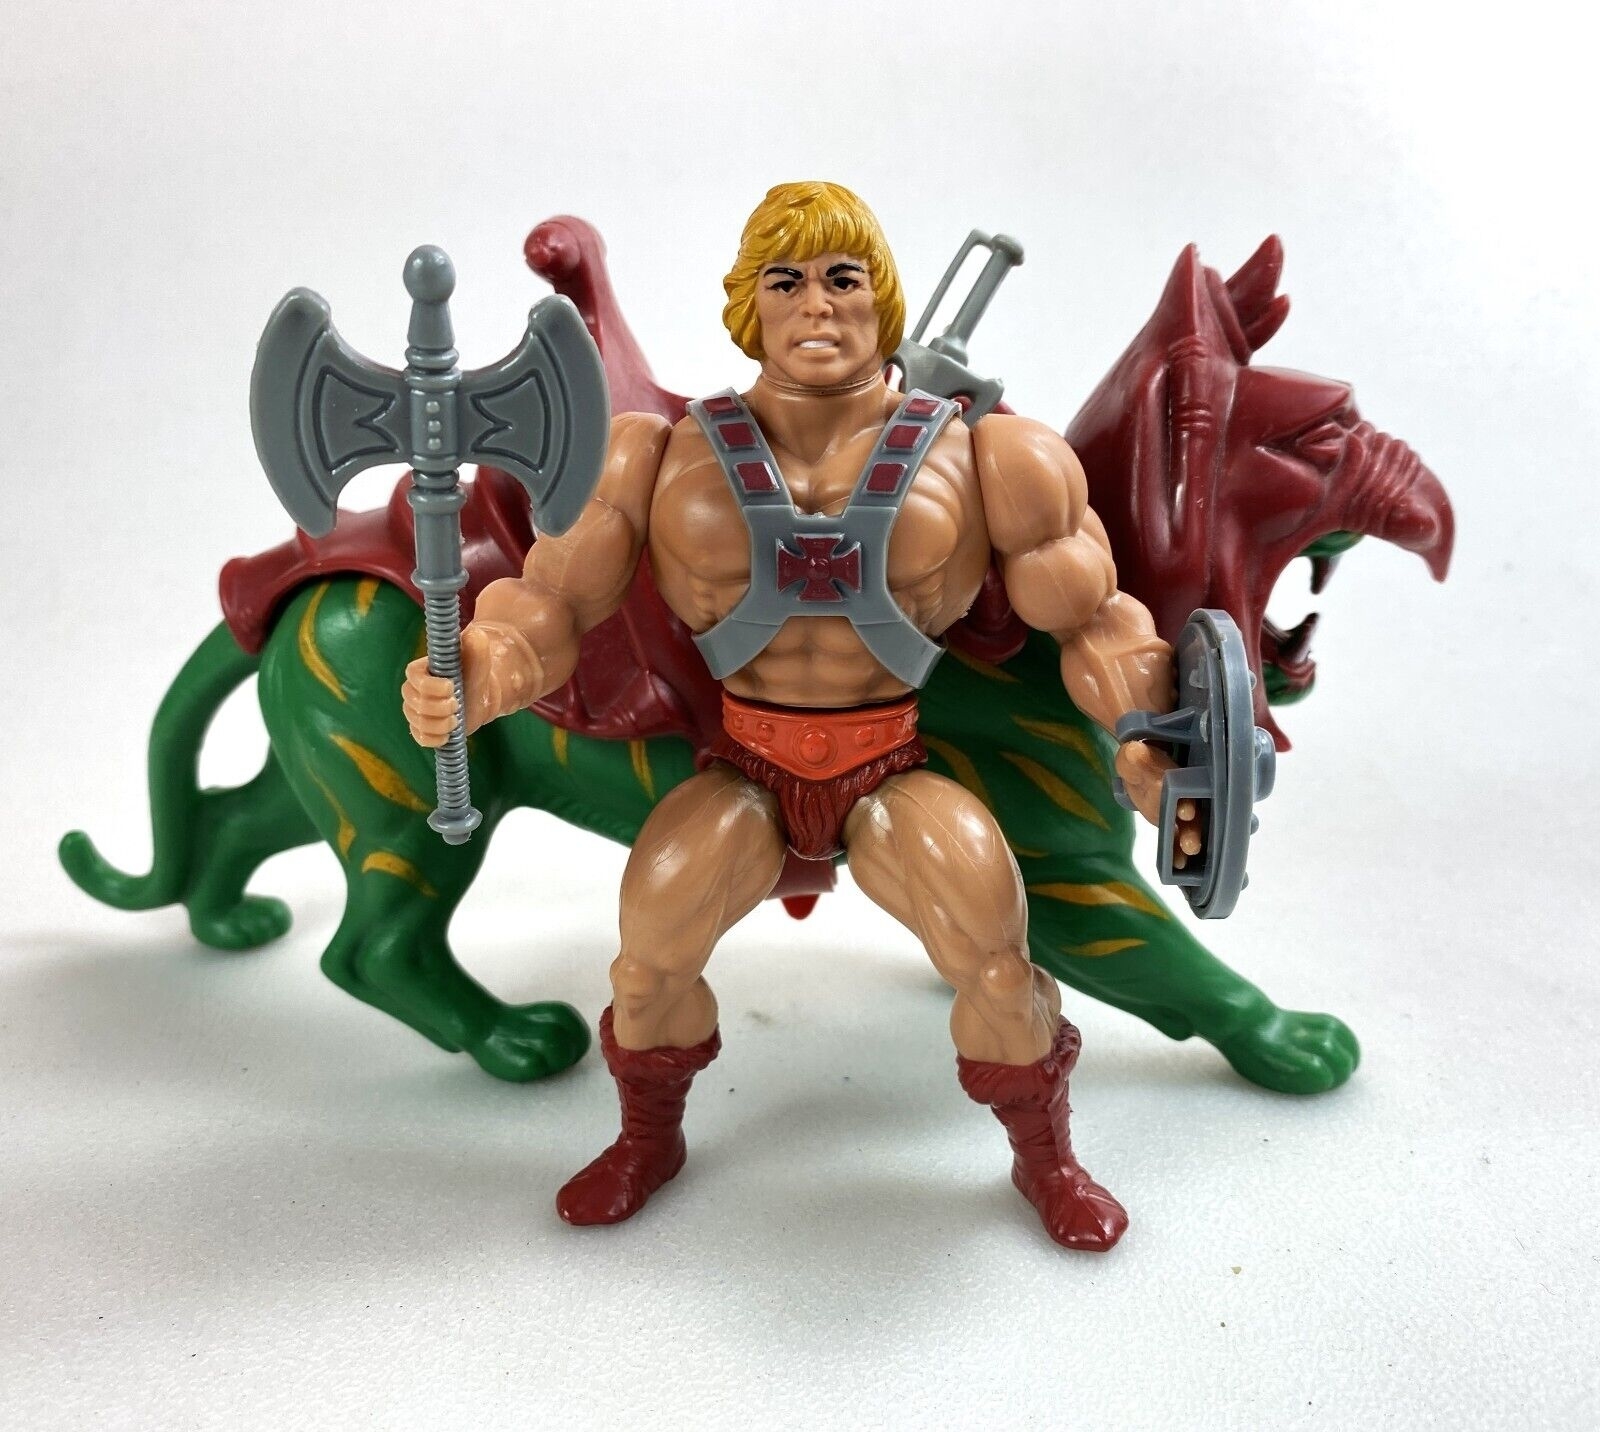 He-Man action figure riding Battle Cat, wielding a sword and an axe, with armor and helmet